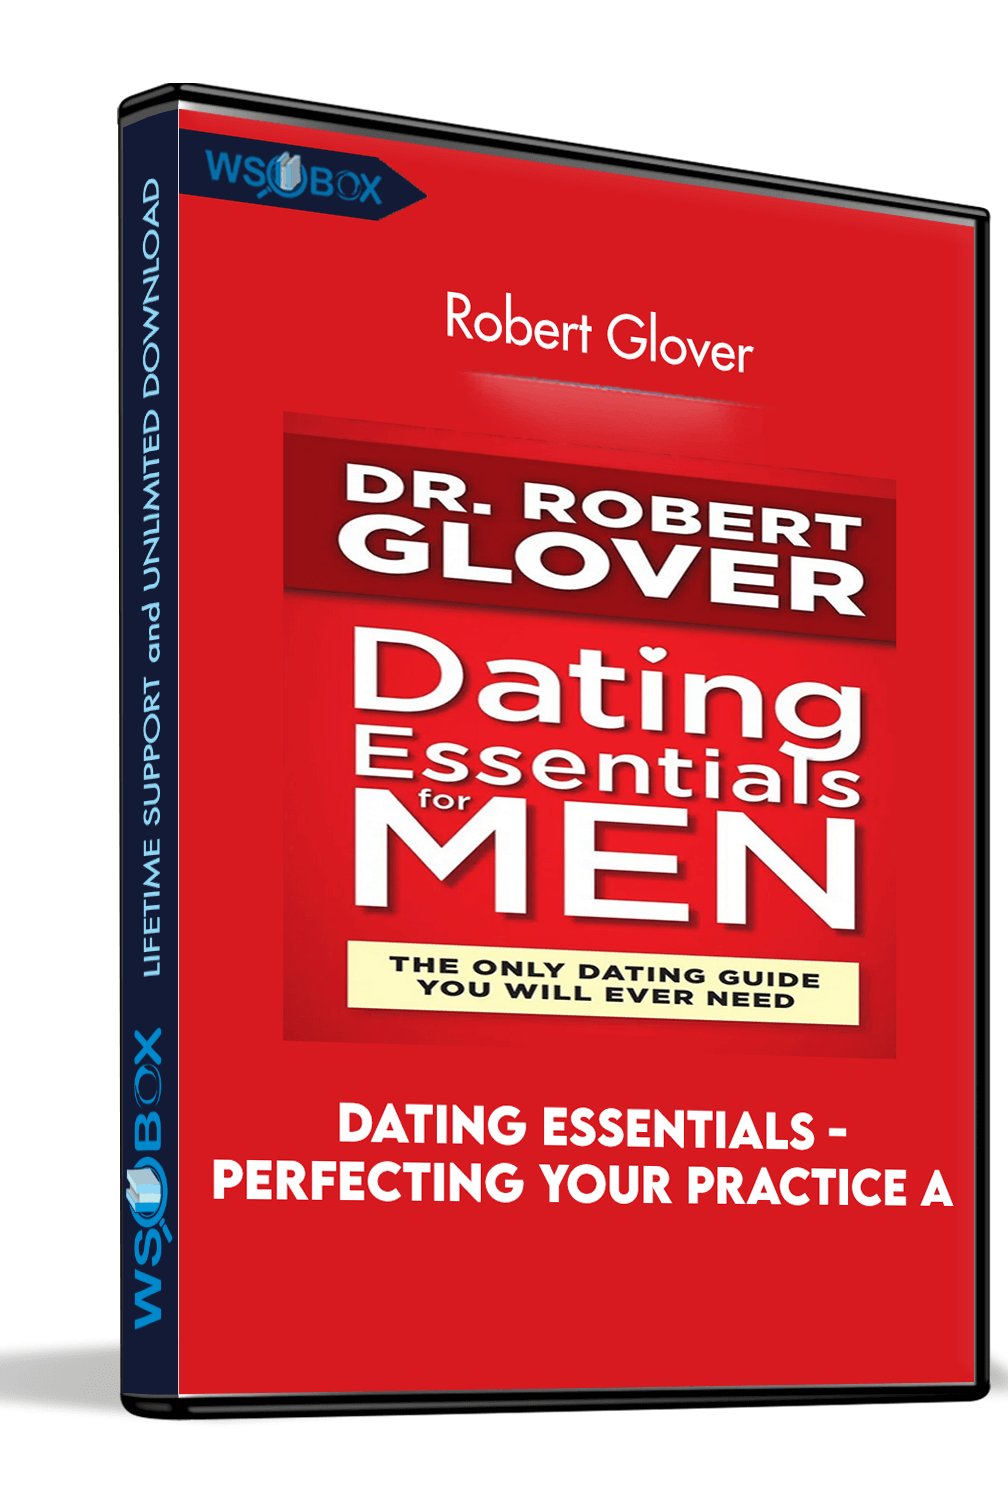 dating-essentials-perfecting-your-practice-a-robert-glover